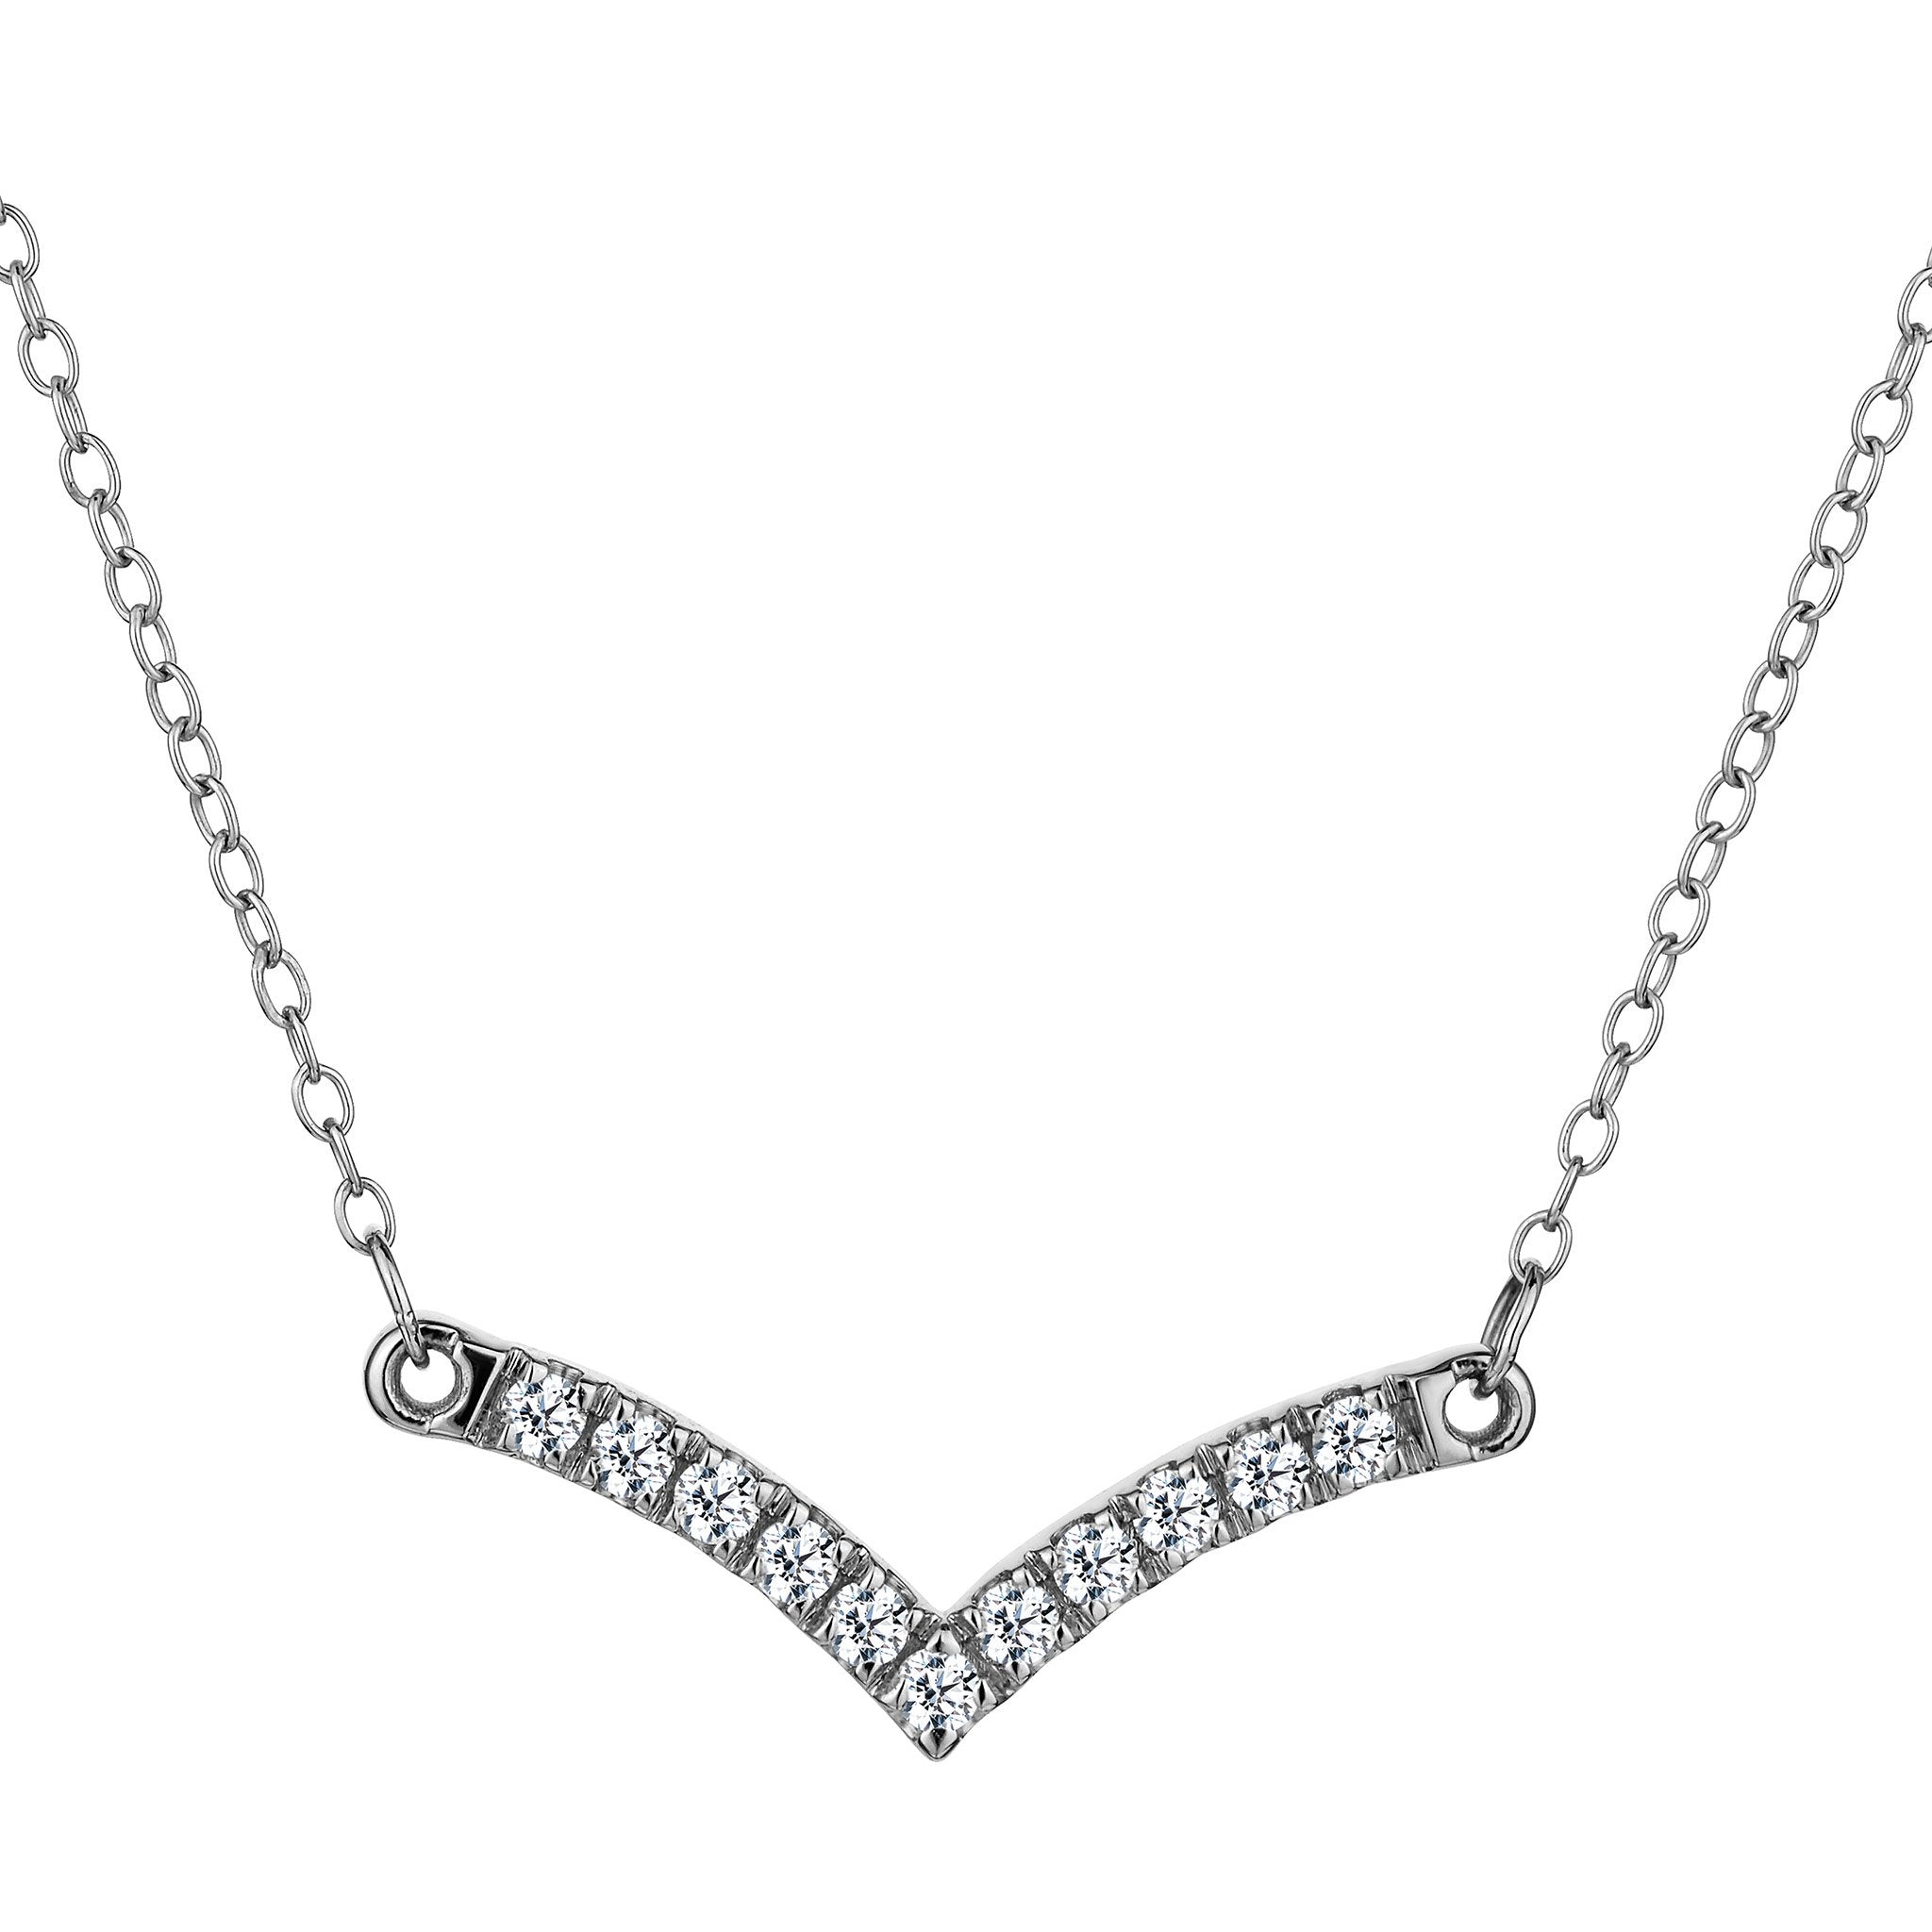 White gold and diamond necklace 0,17 carats